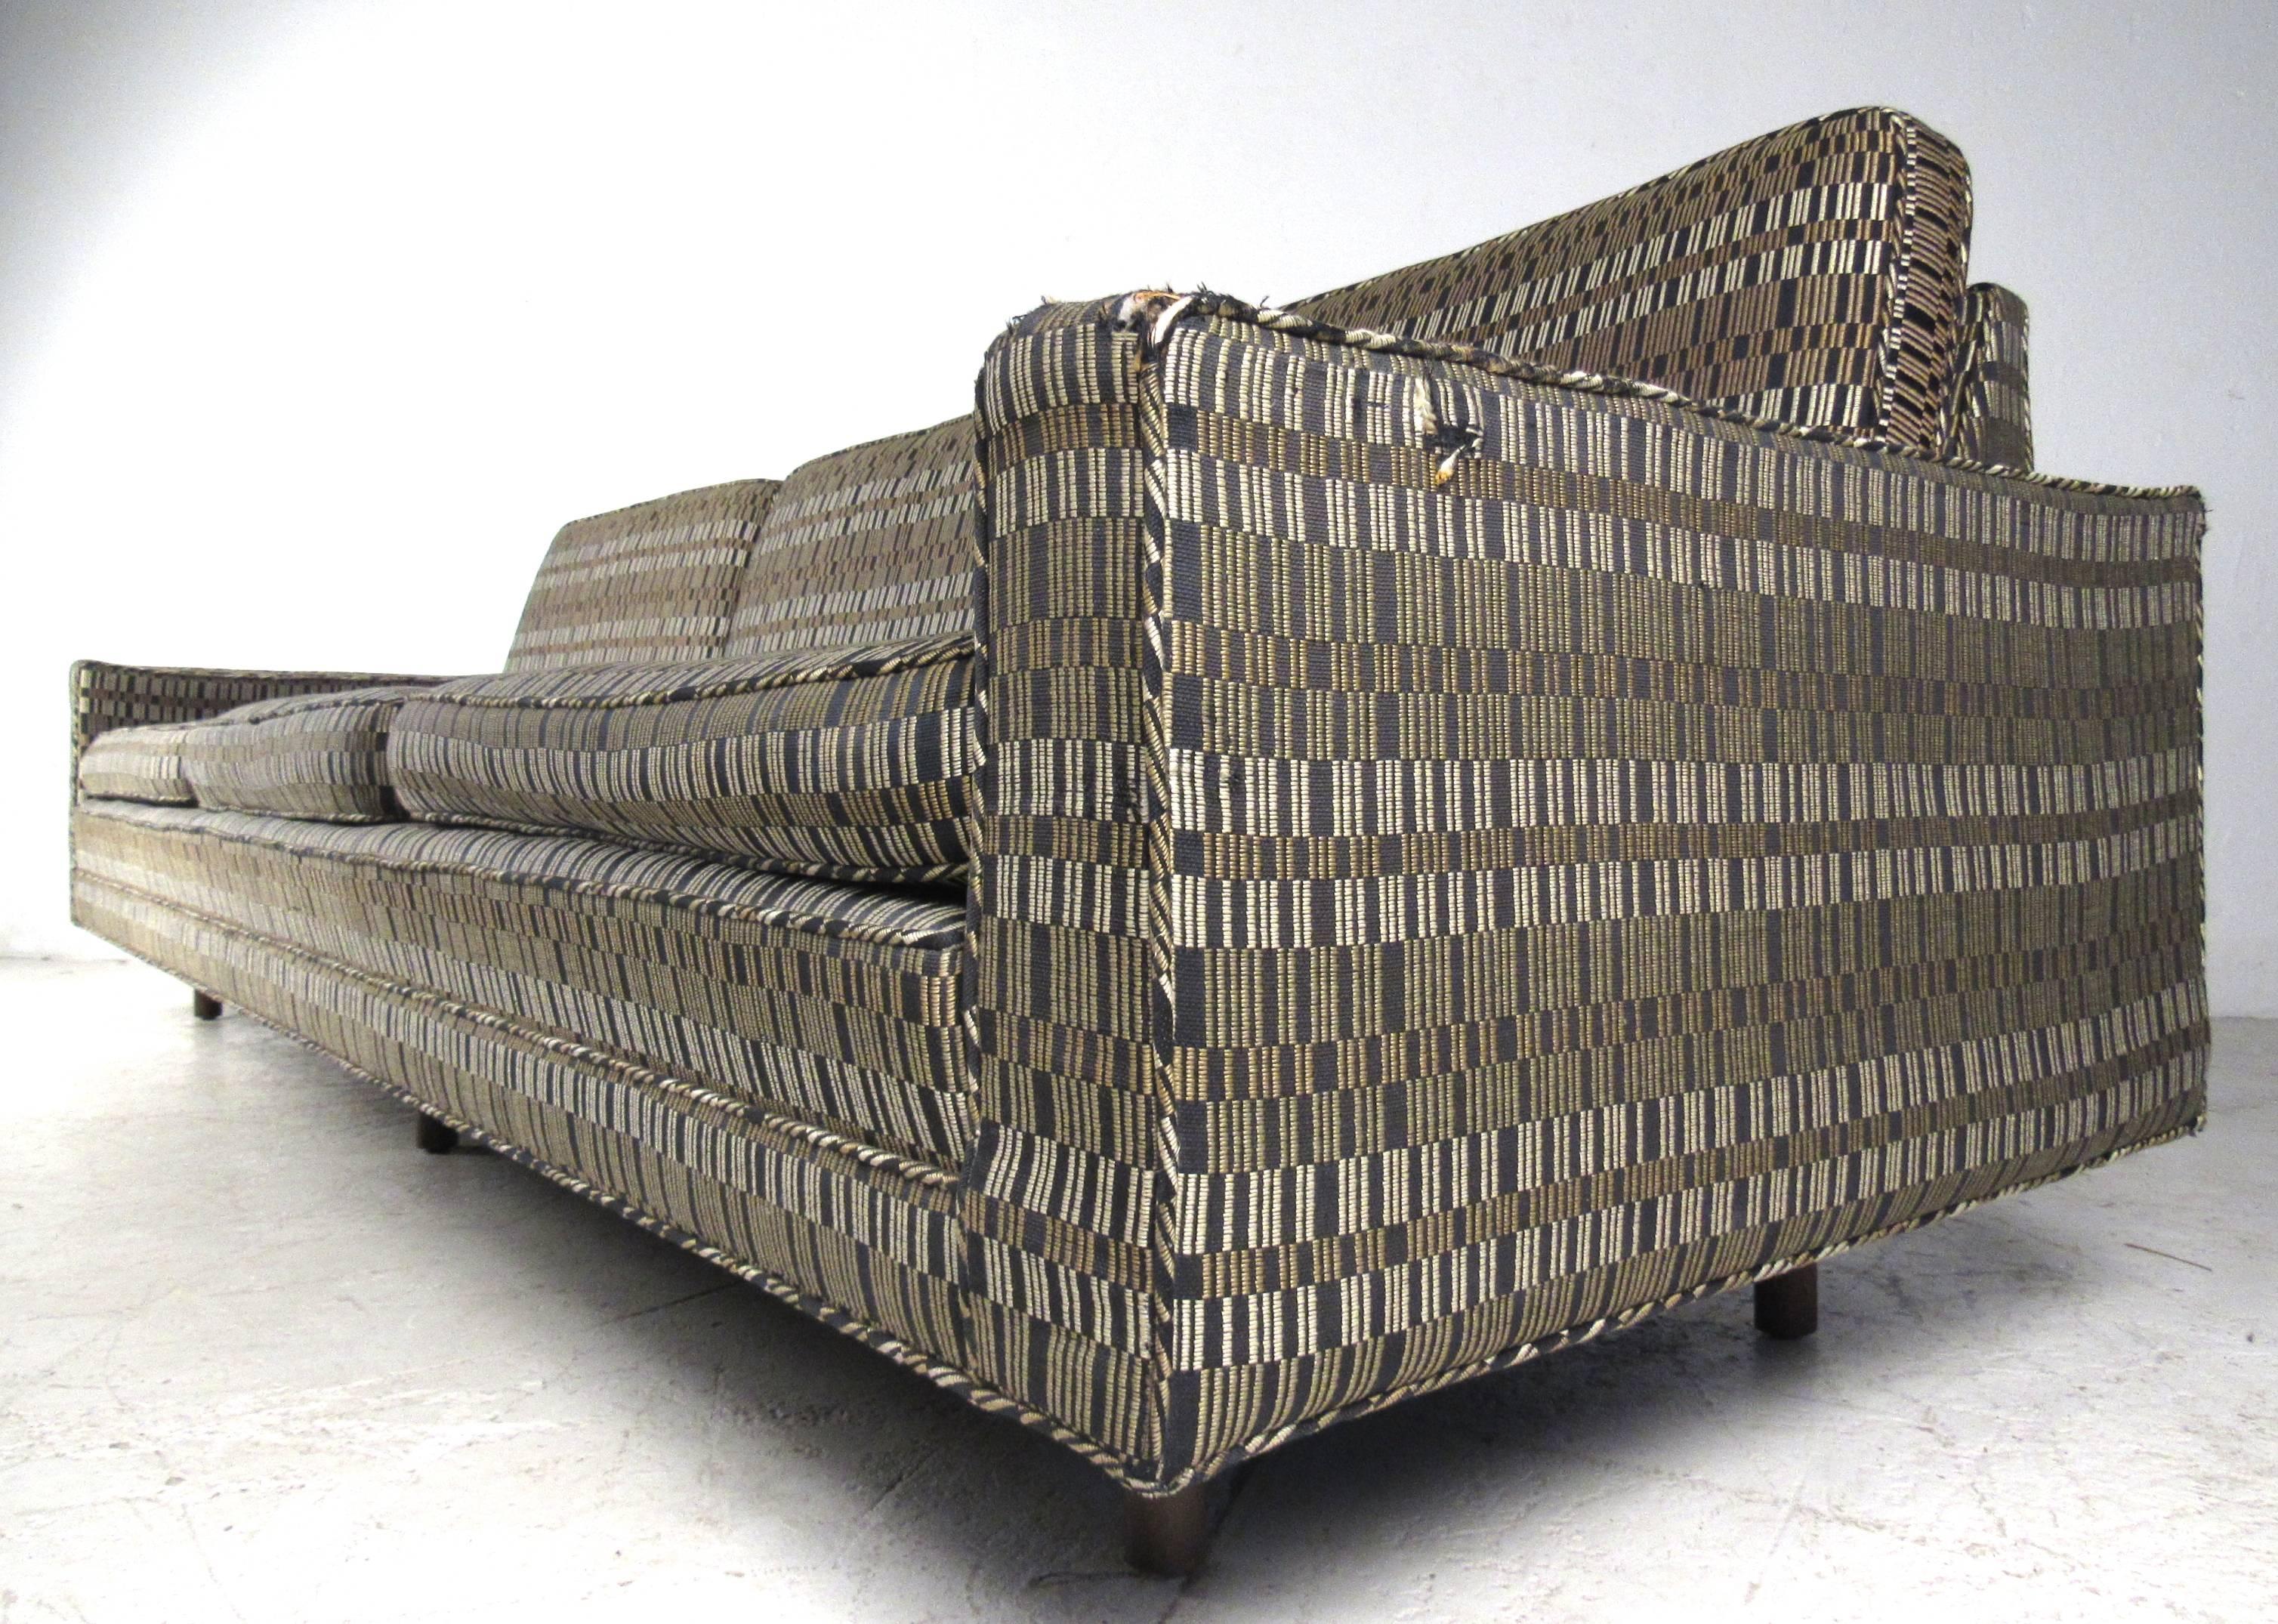 This gorgeous oversized sofa by Harvey Probber offers a stylish and comfortable seating option for any interior. Vintage fabric, quality six leg construction, and unique low profile design add to it's Mid-Century charm. Please confirm item location